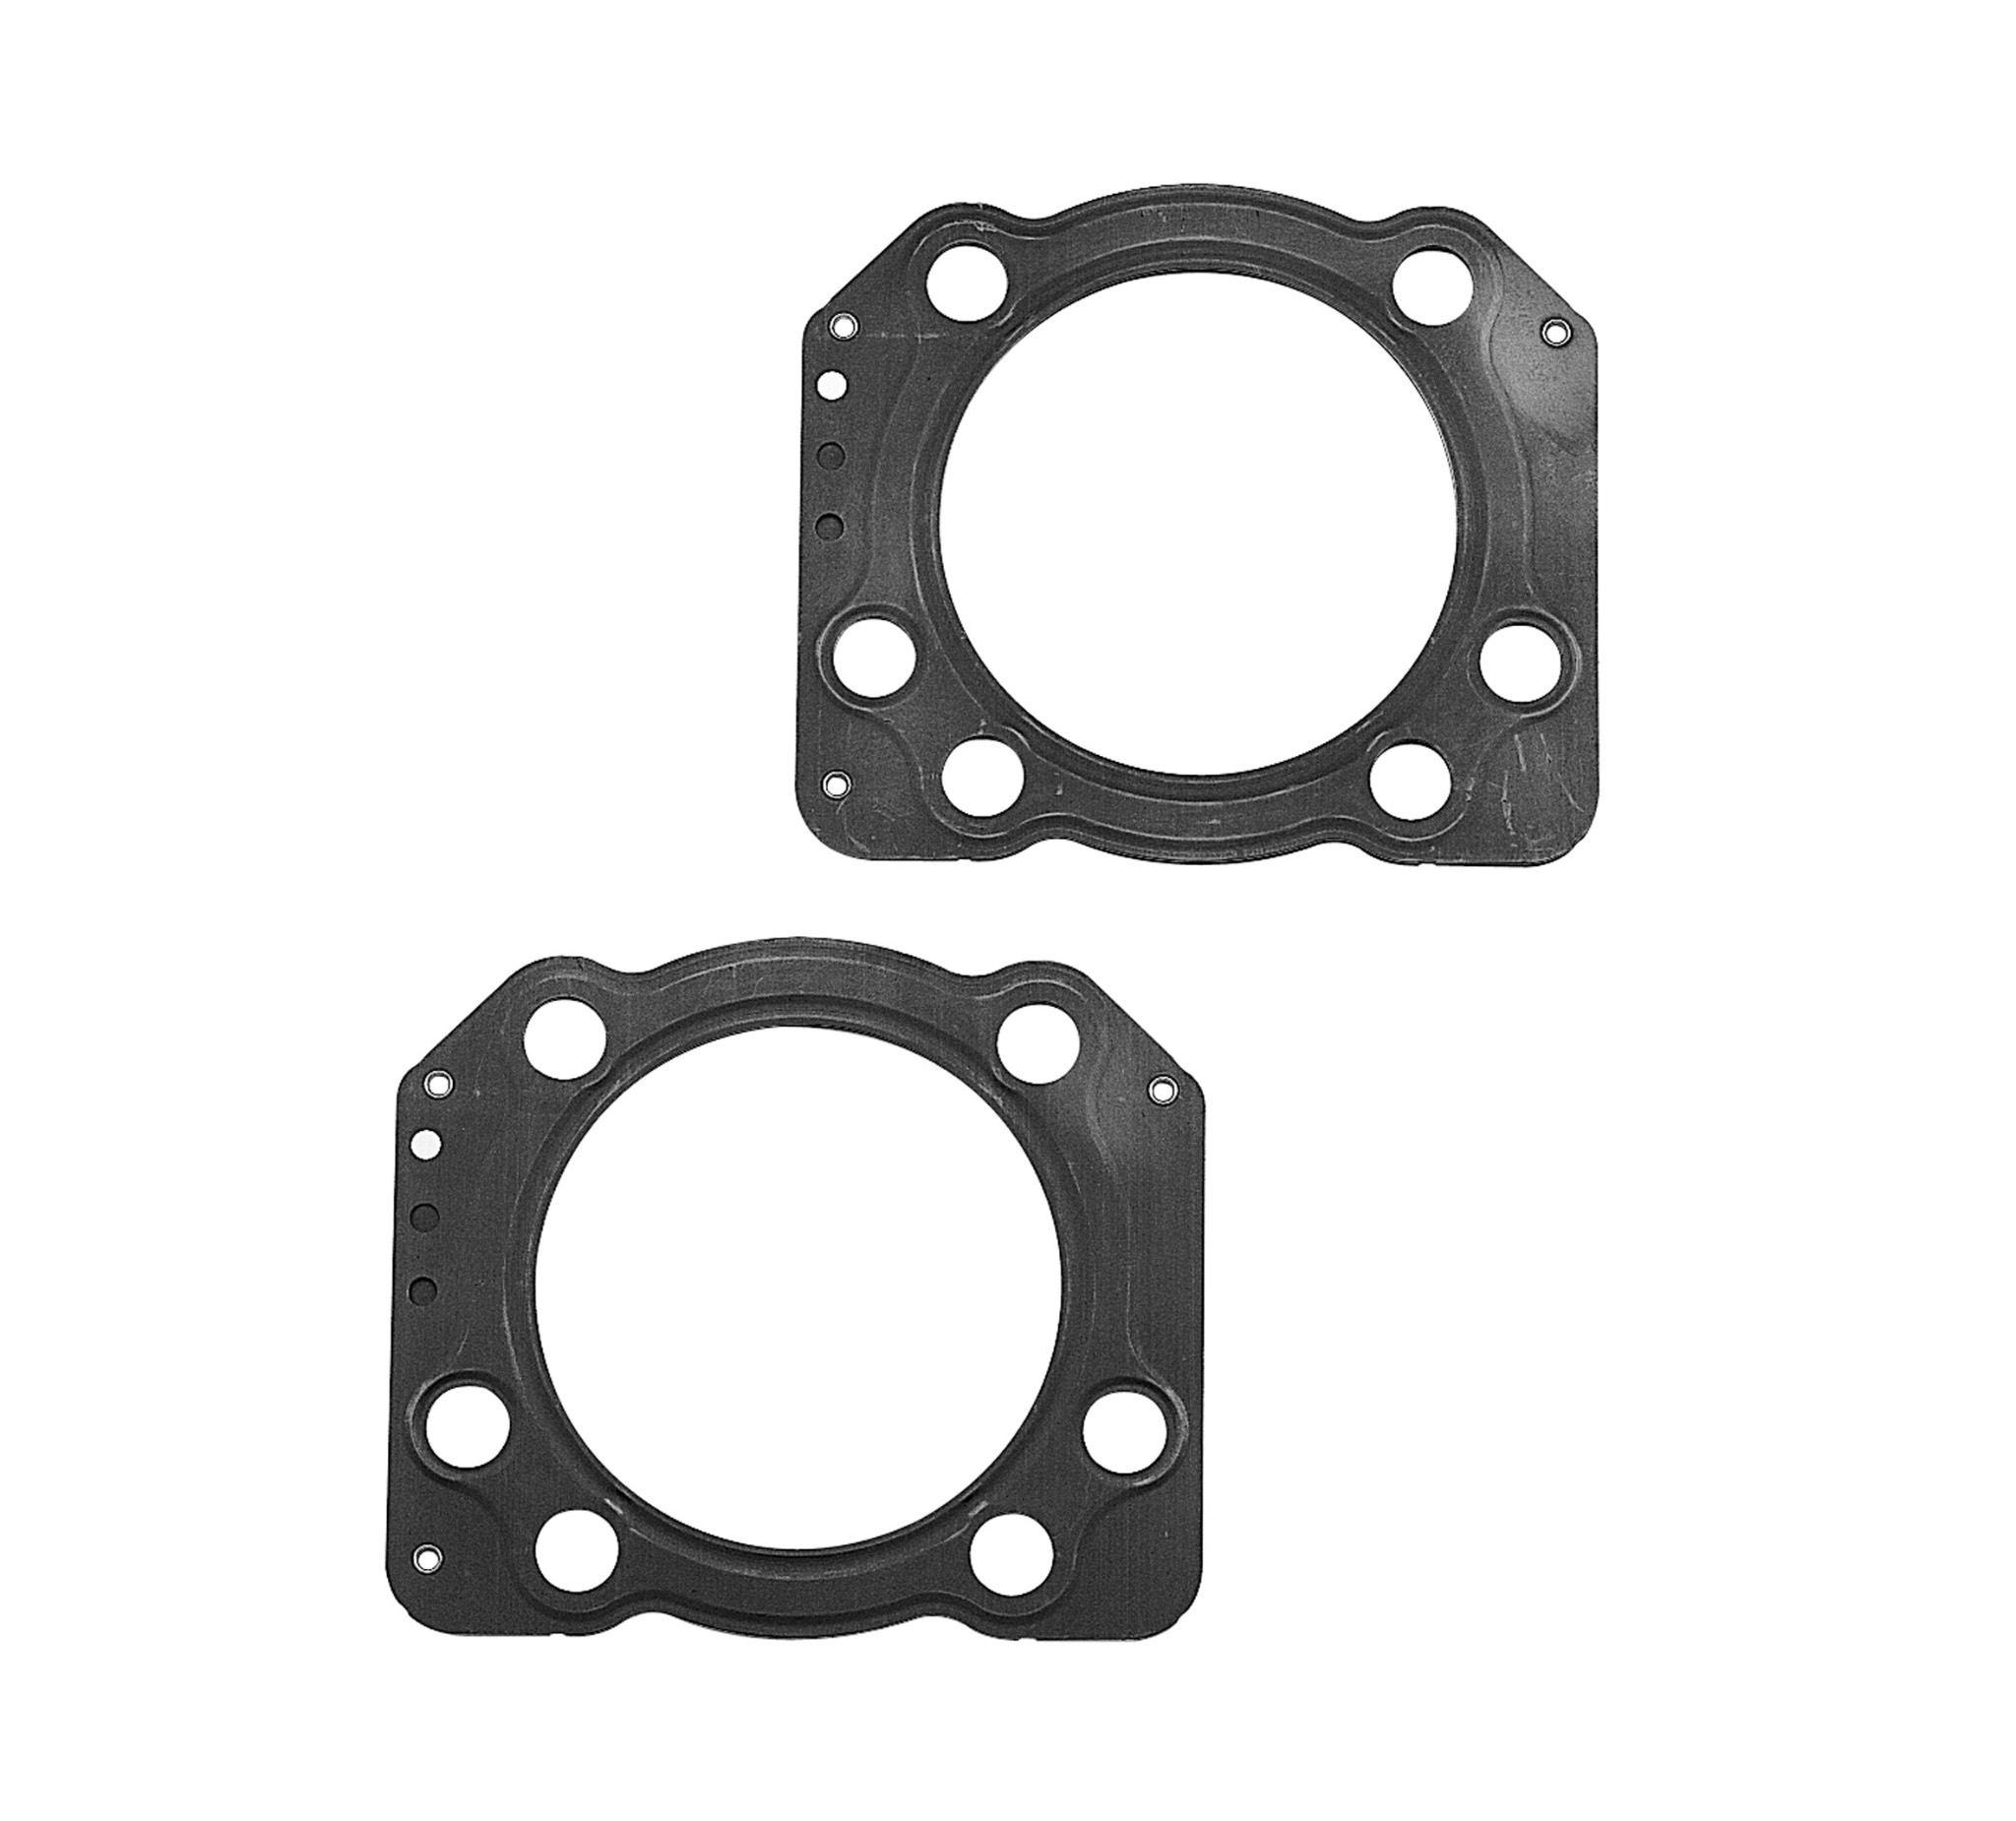 Cometic 9146 Top End Gasket Kit For Harley-Davidson Twin Cam 88" & 96" 2005-2016